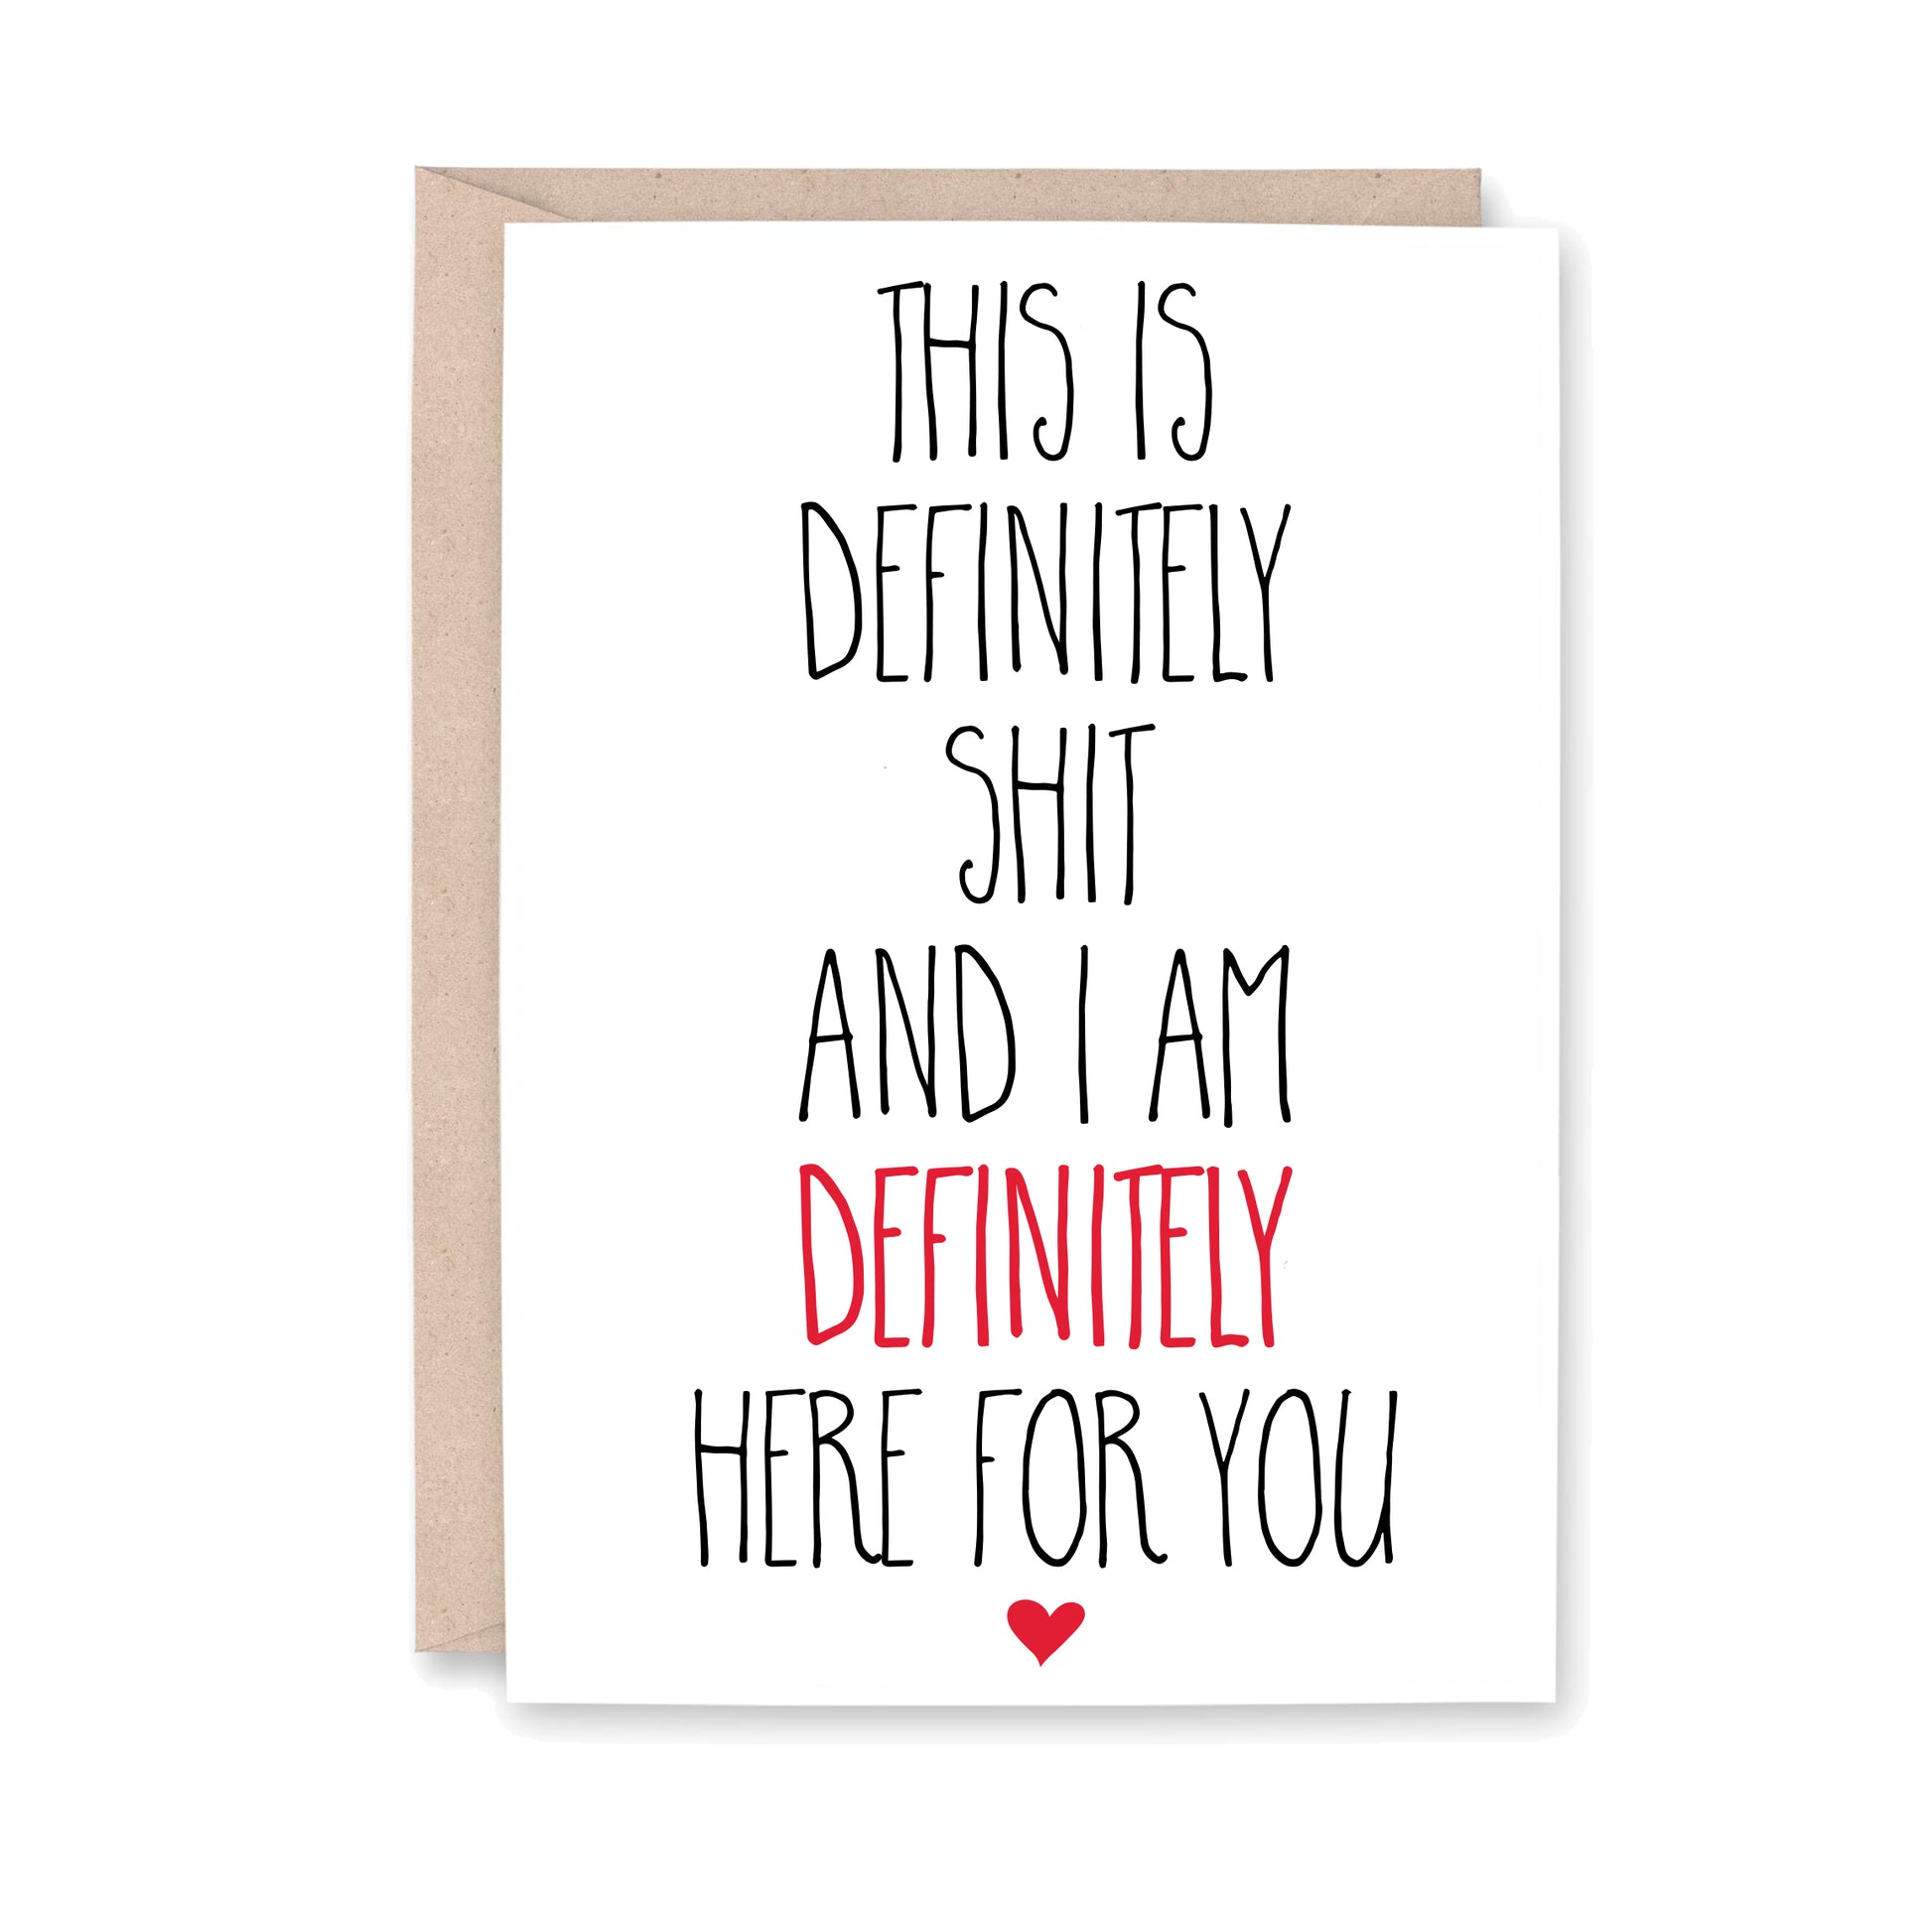 Greeting card that reads "This is definitely shit and I am definitely here for you."